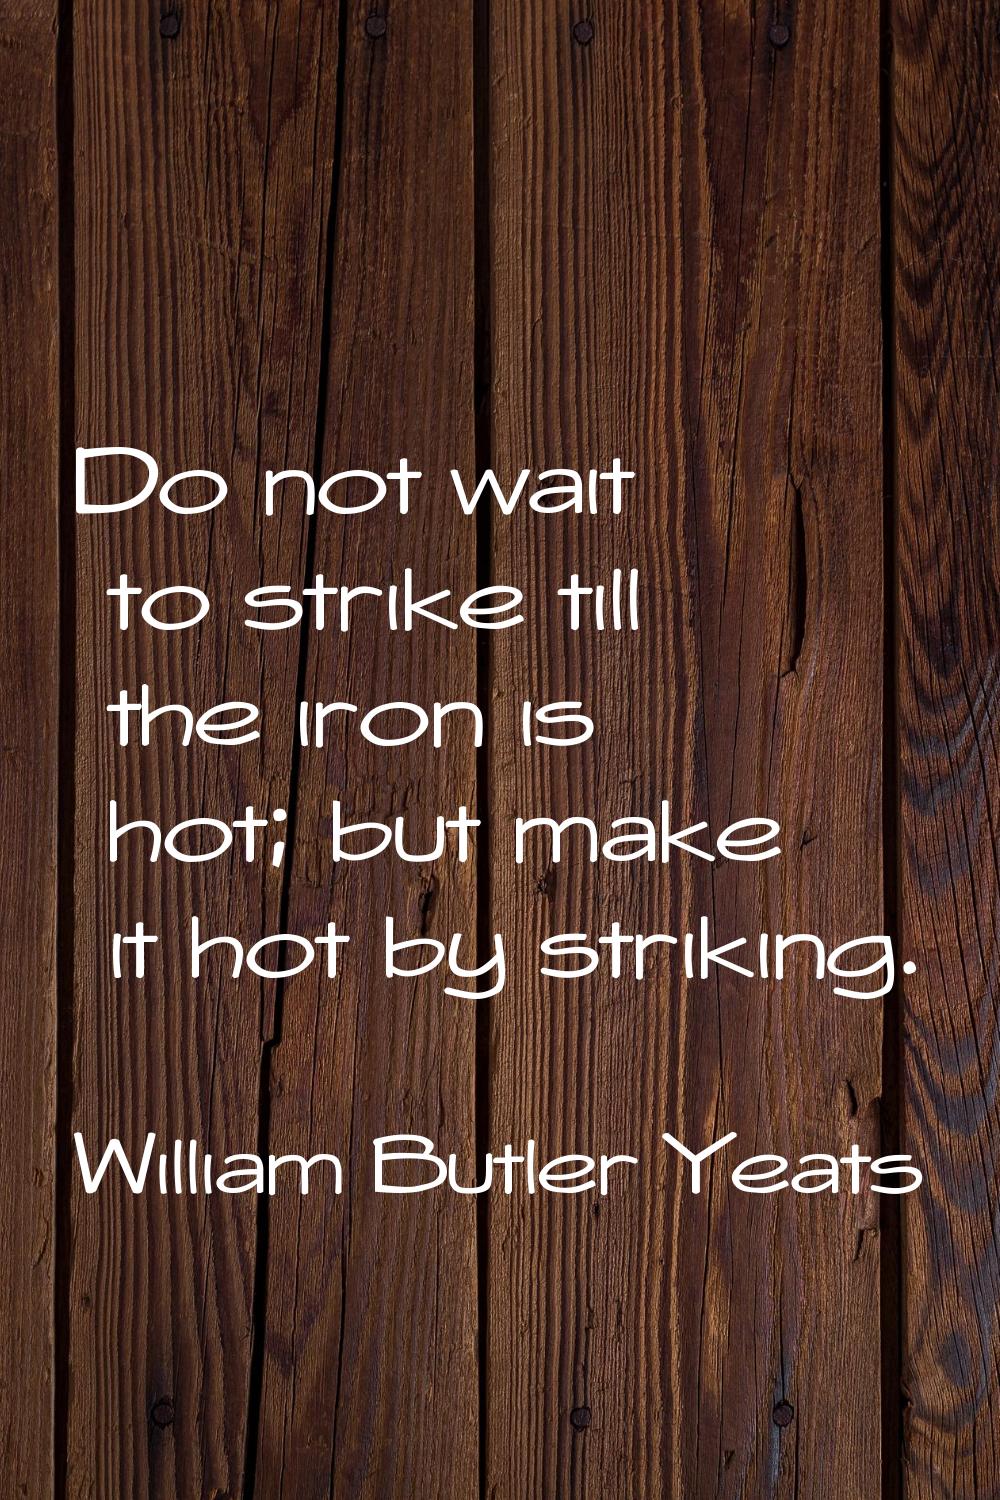 Do not wait to strike till the iron is hot; but make it hot by striking.